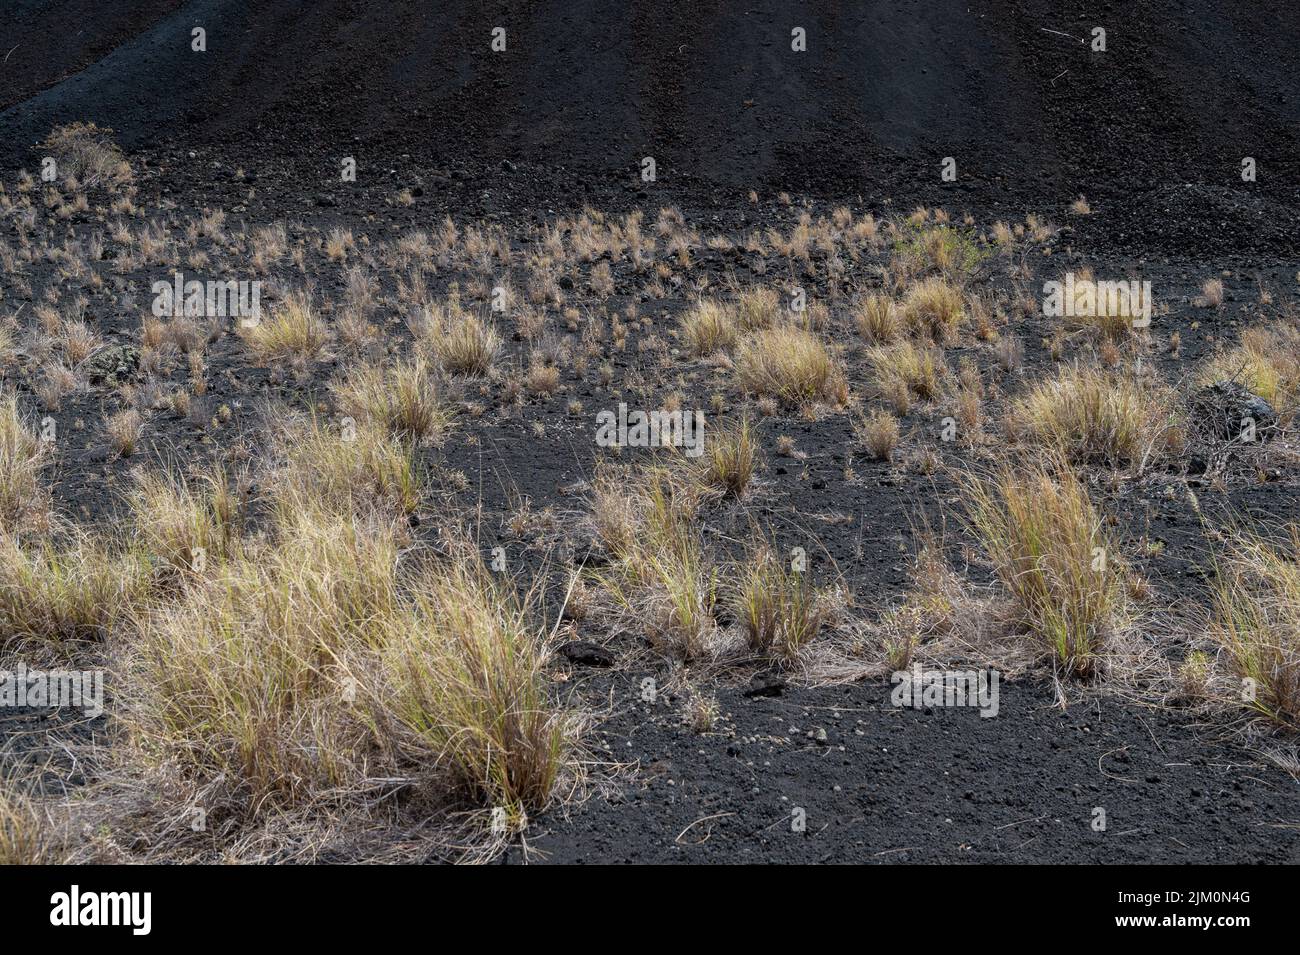 Volcano landscape and adapted plants in Tsavo West National Park, Kenya, Africa Stock Photo